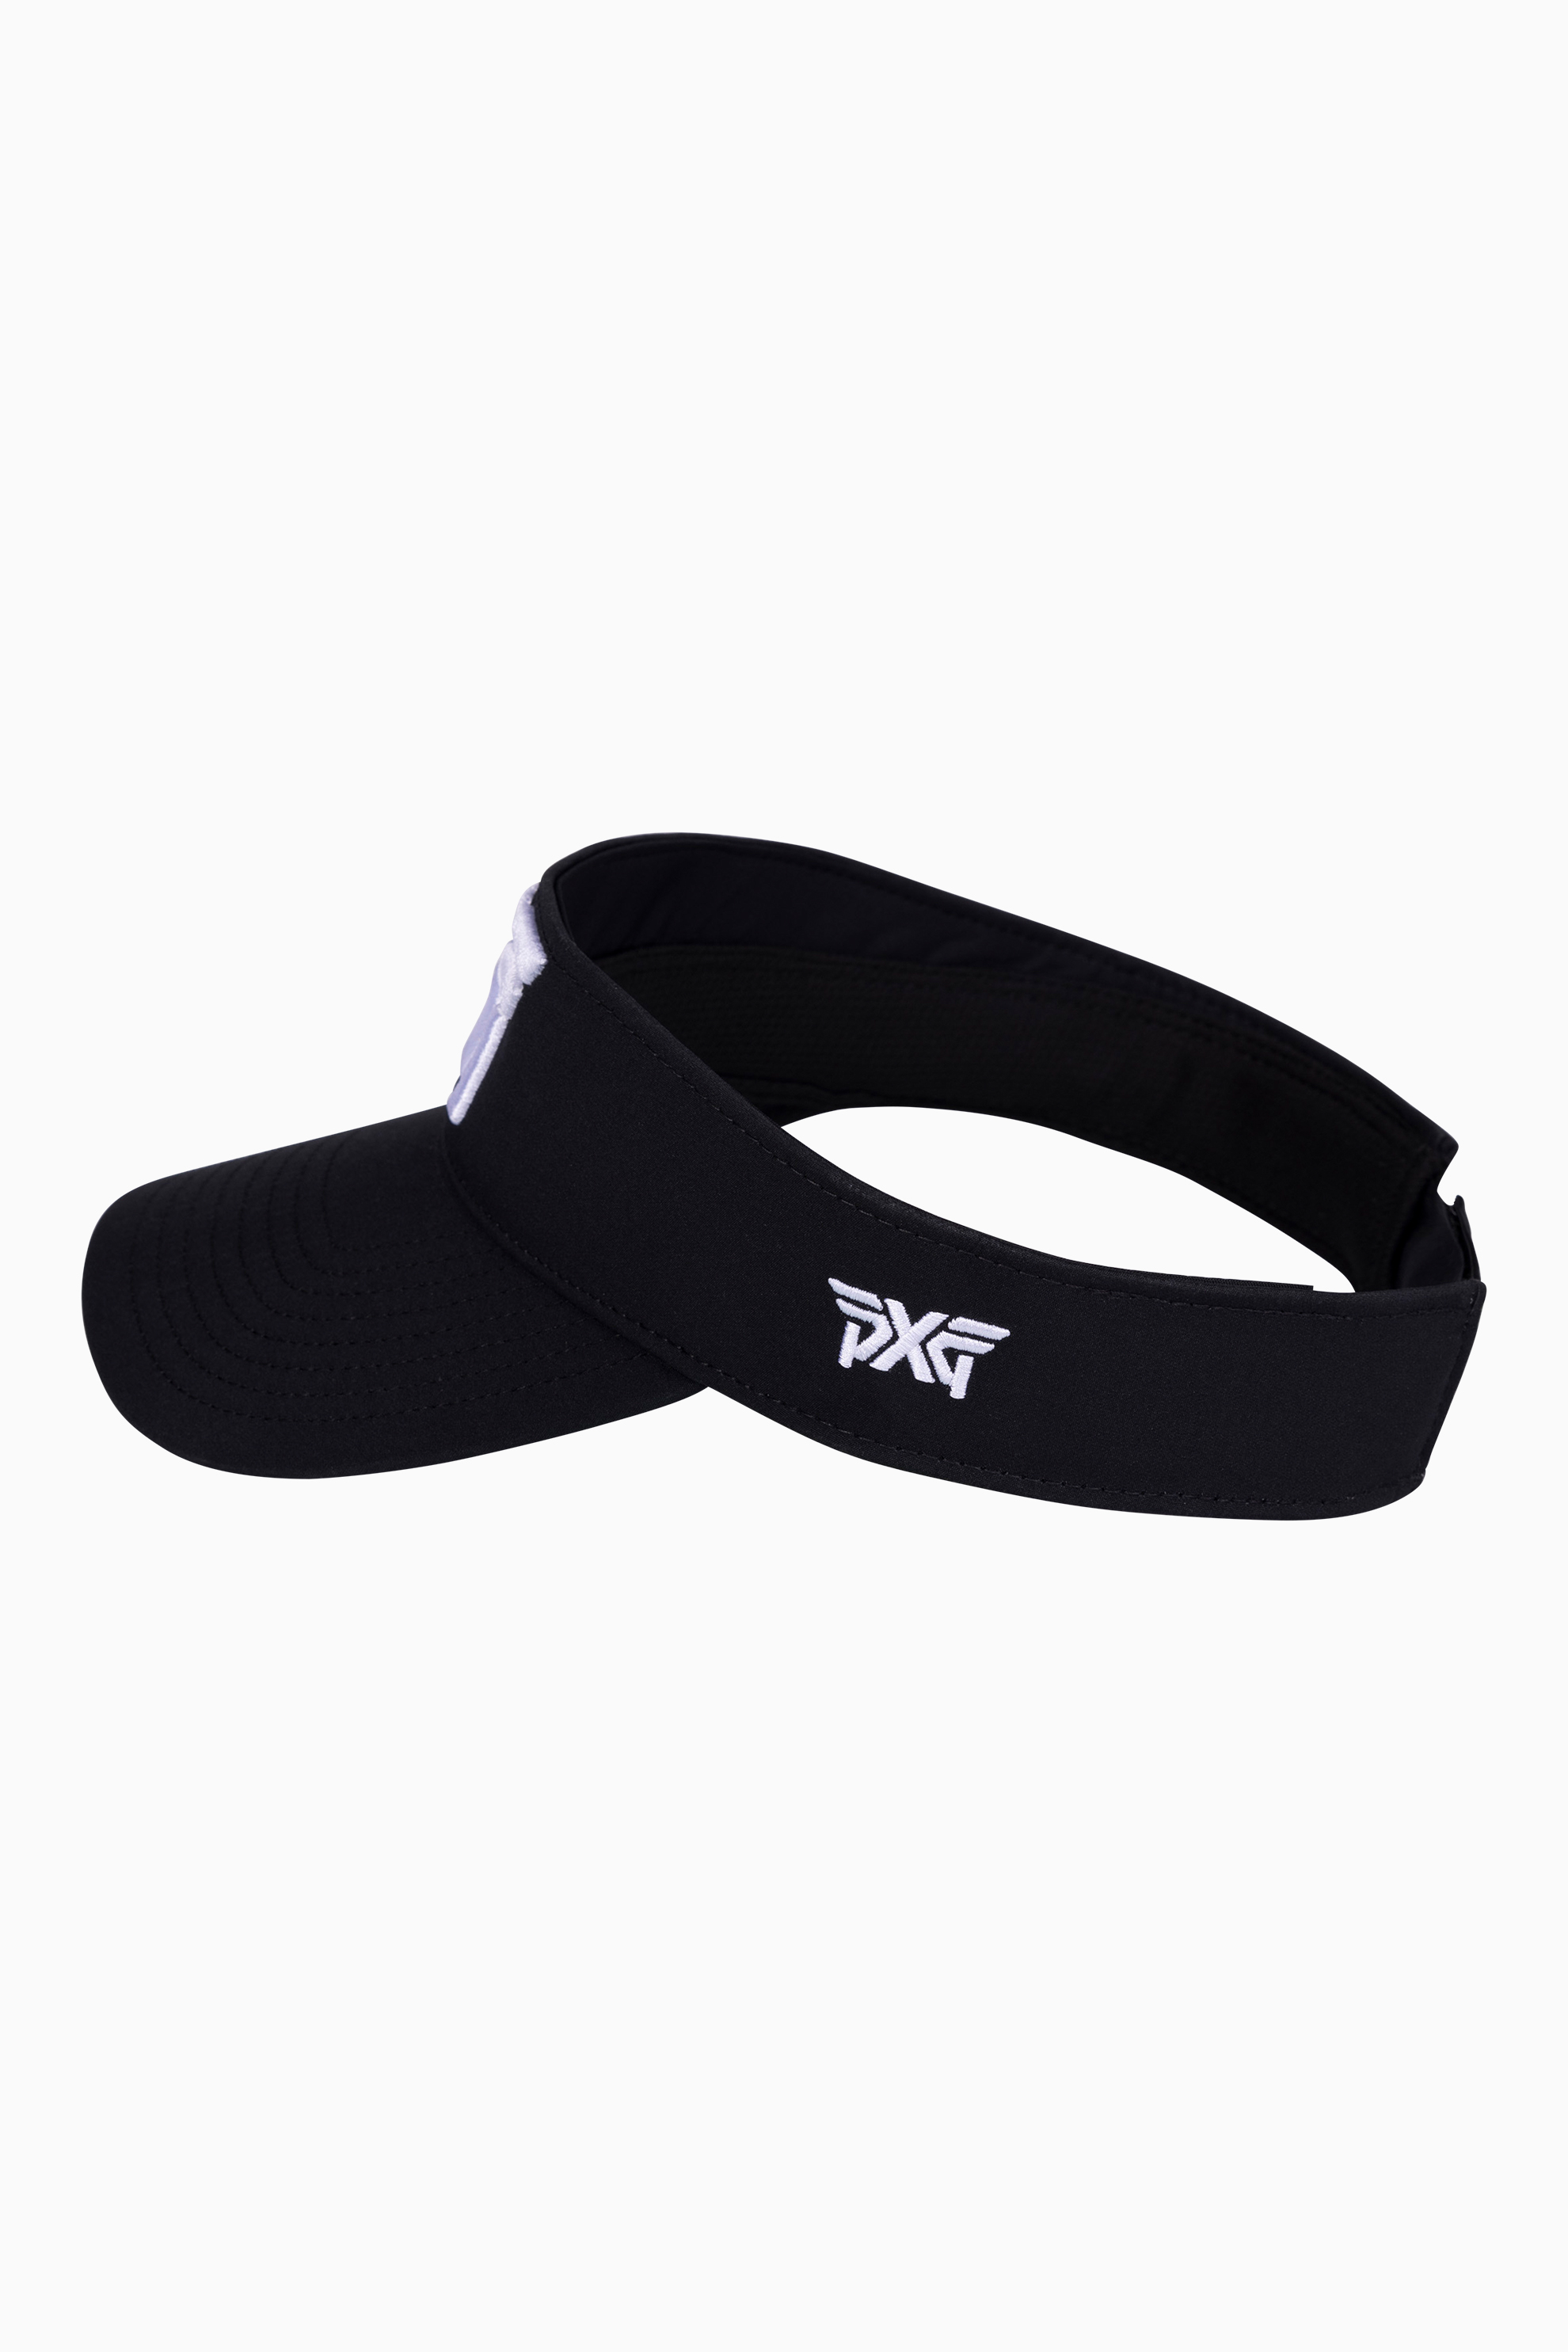 Sport Visor Accessories and at Clubs Quality Gear, Apparel, Shop the Golf | Highest Golf PXG